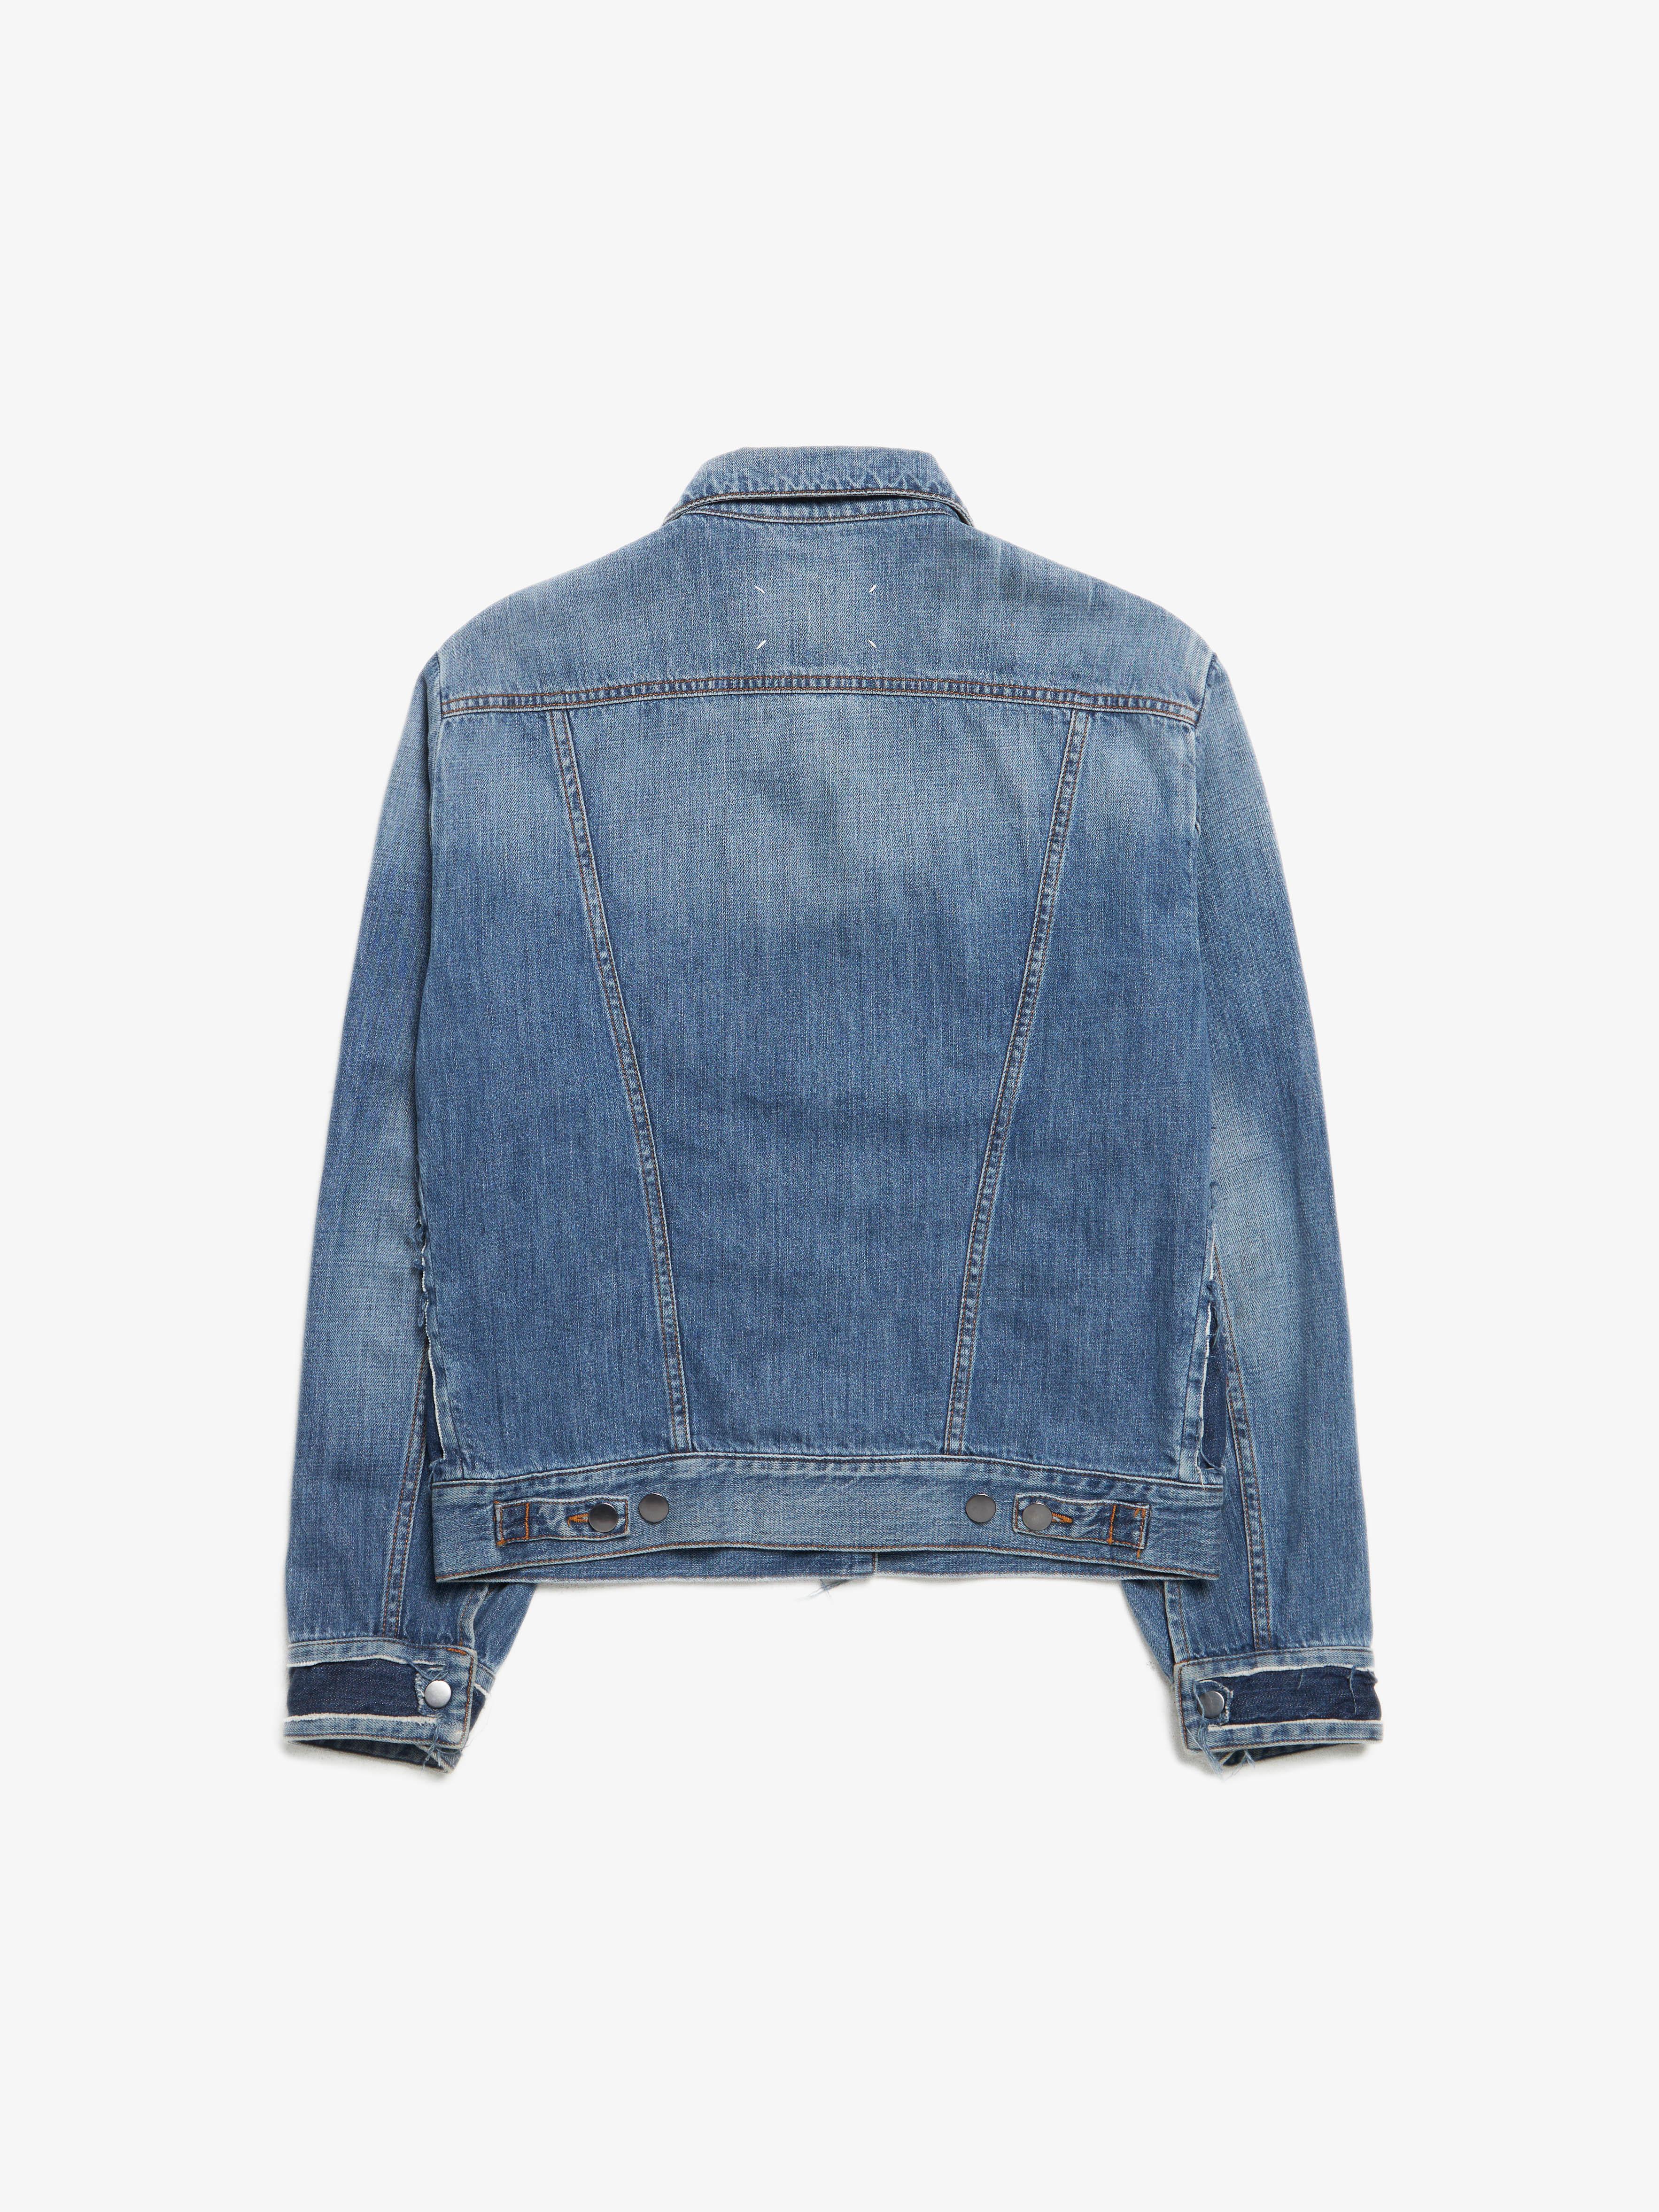 Maison Margiela  Navy and Blue Patchwork and Raw Hem Detailed Denim Jacket
Size marked: 40
Condition: Gently used
Material: 100% Cotton
Measurements: Shoulder to shoulder (cm) 46/ pit to pit (cm) 50/ Length (cm) 63/ sleeve (cm) 61/ 
(143583)